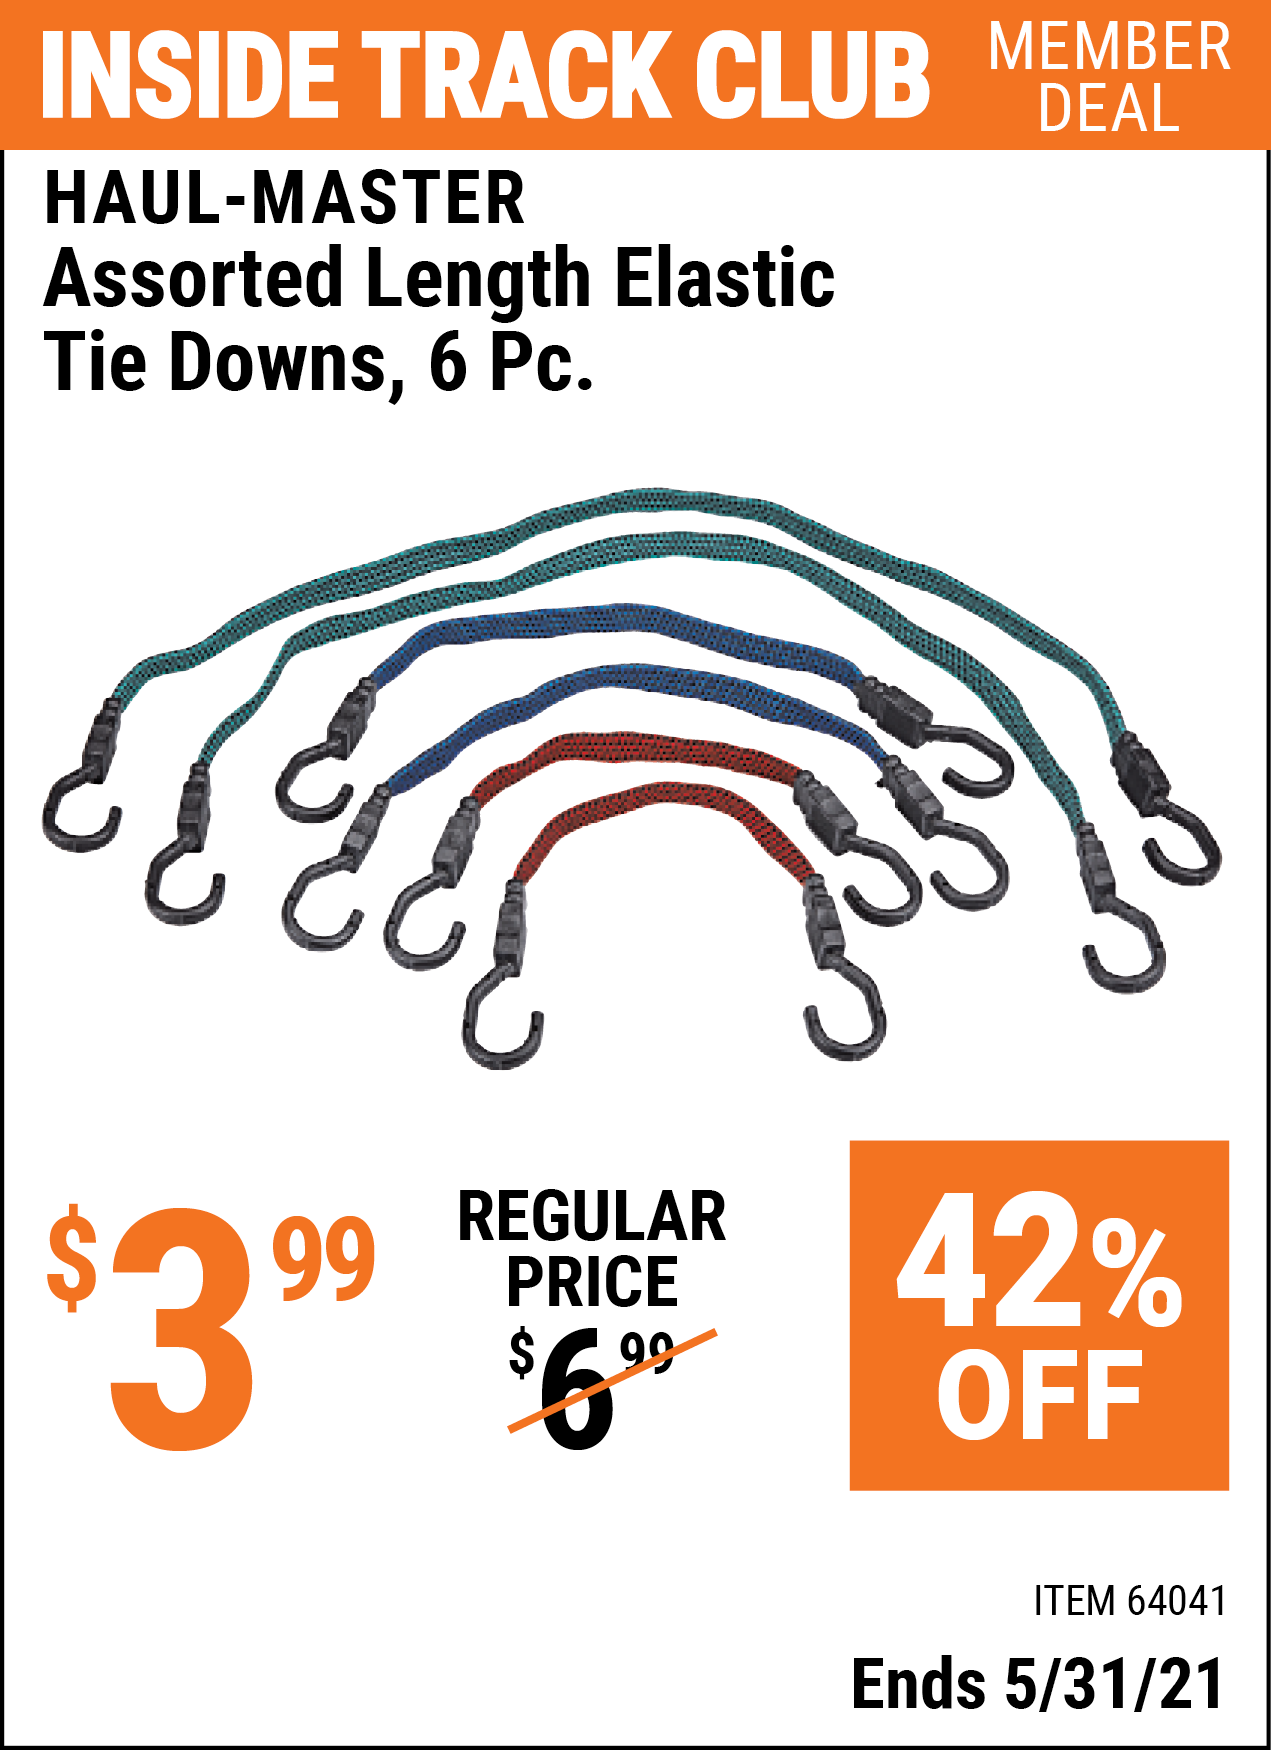 Inside Track Club members can buy the HAUL-MASTER Assorted Length Elastic Tie Downs 6 Pc. (Item 64041) for $3.99, valid through 5/31/2021.